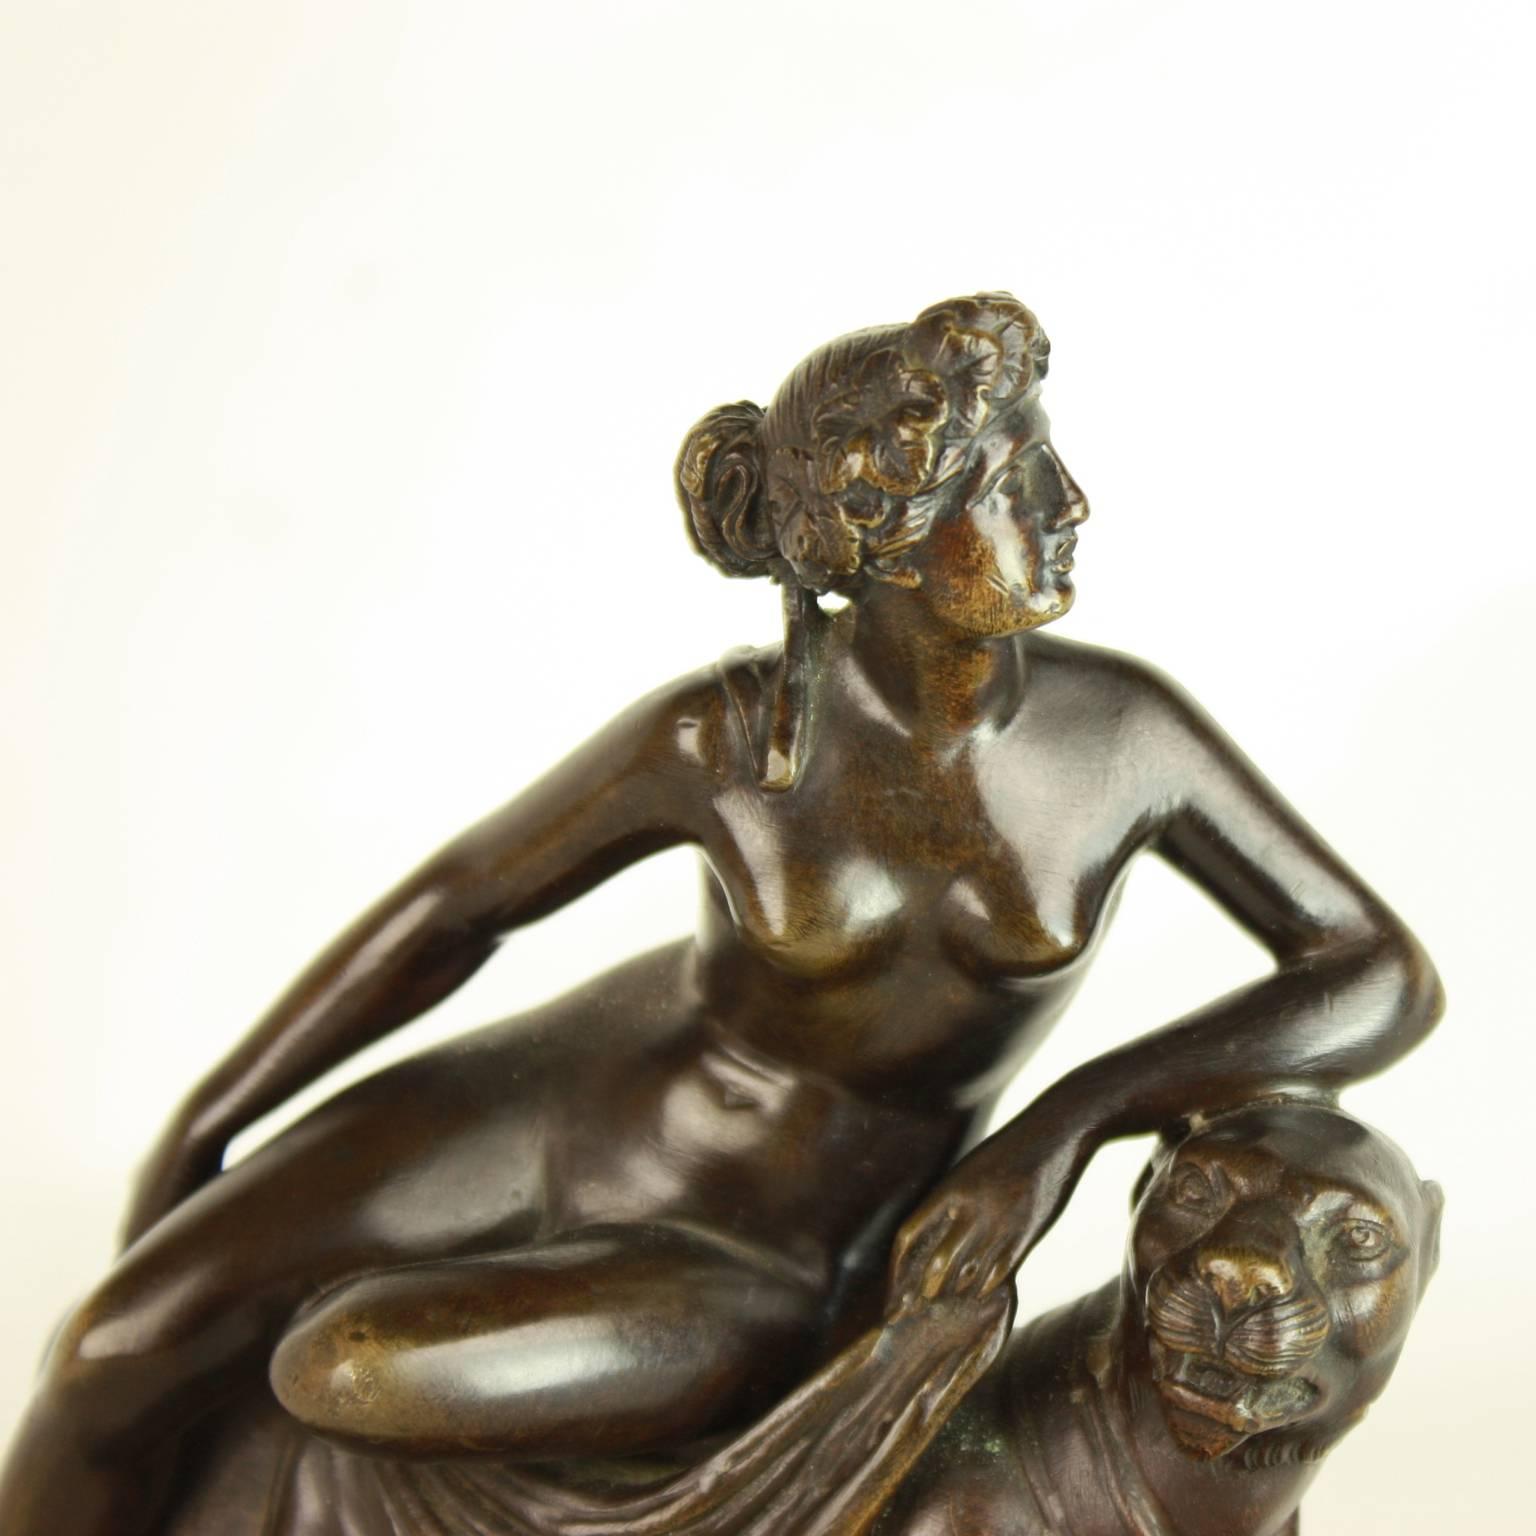 Small bronze sculpture of of 'Ariadne Riding a Panther' after a masterpiece by Johann Heinrich von Dannecker (1758-1841). The original Marble sculpture is perhaps one of the best-known German sculptures of the 19th century (exhibited at Liebighaus,